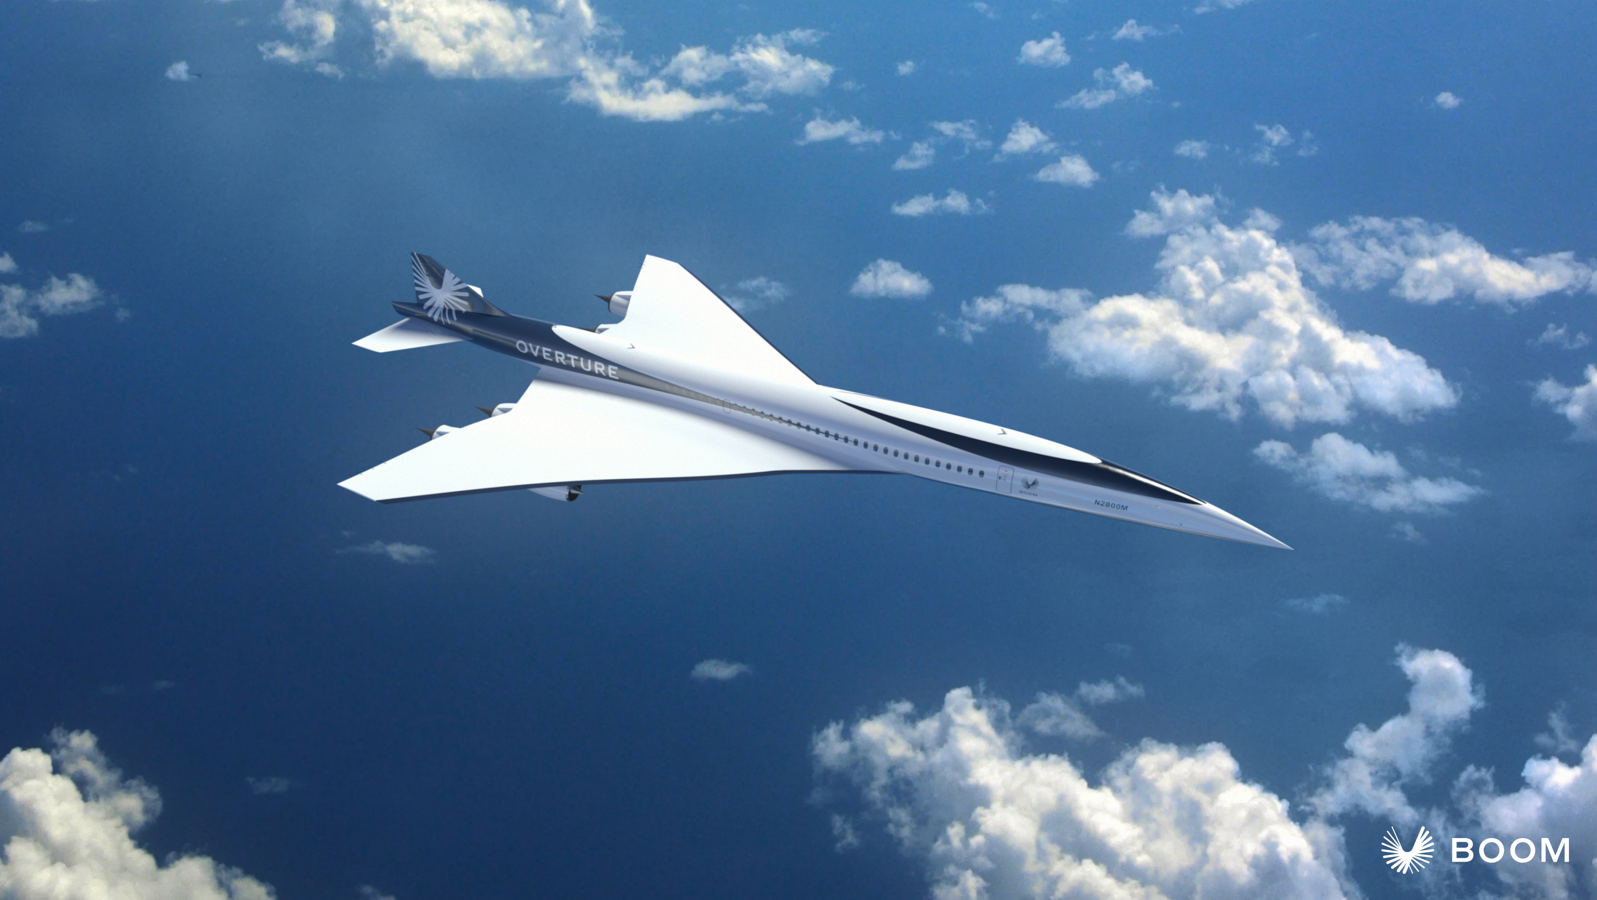 An artist's impression of Boom Supersonic's Overture aircraft in flight.